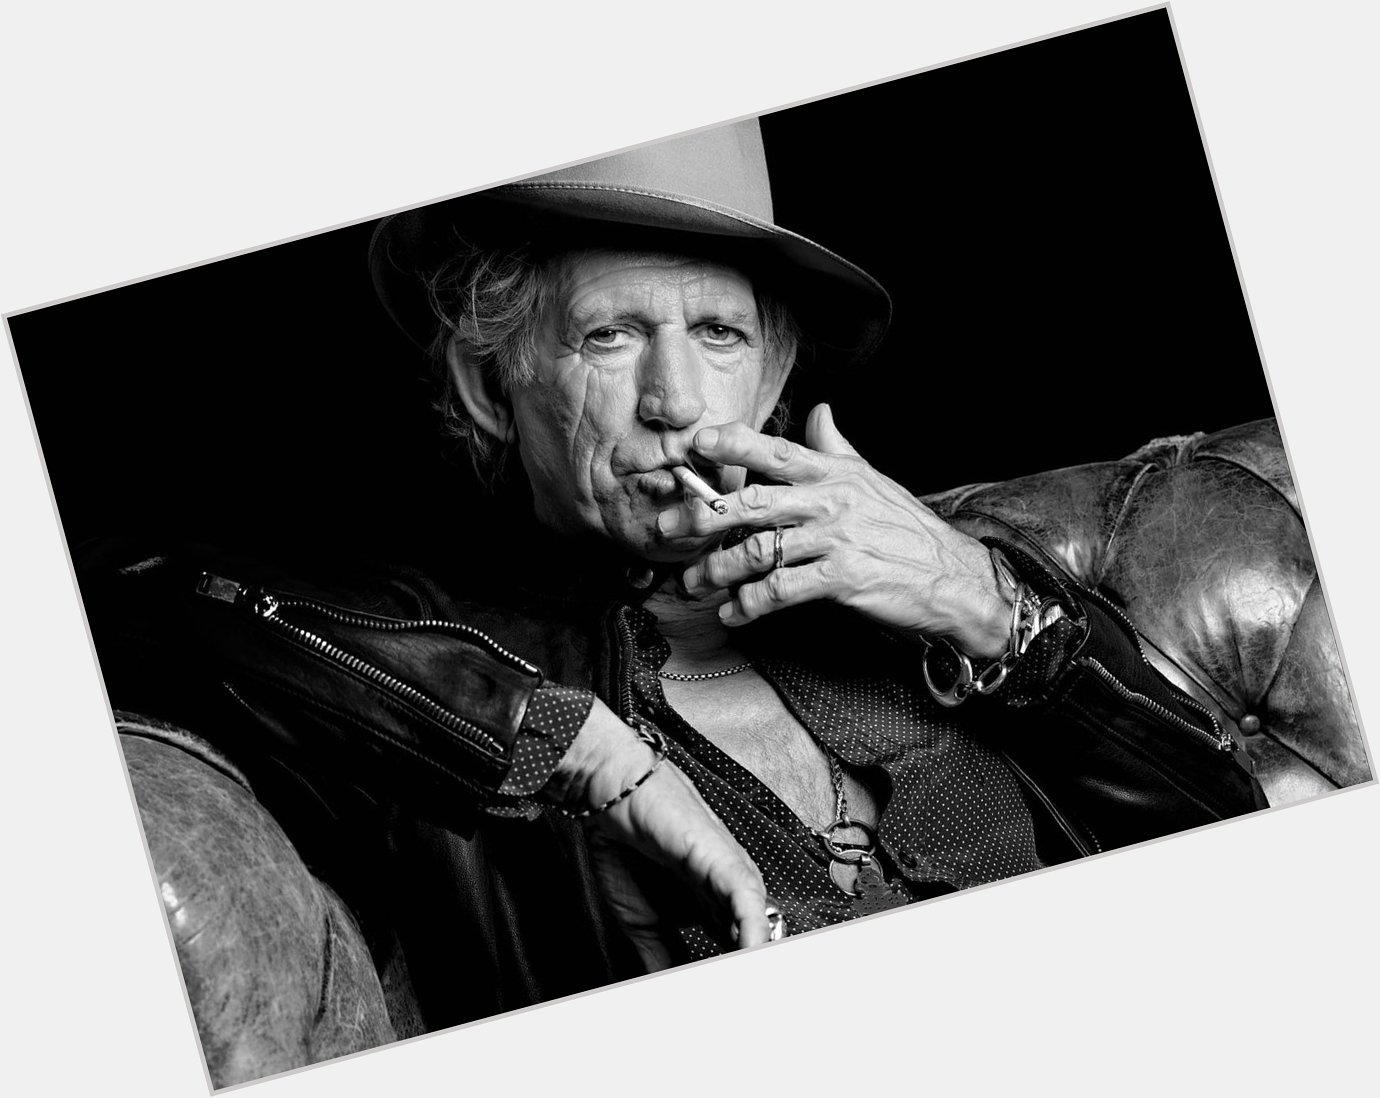 Meanwhile............
Rollin\ Stone lead guitarist Keith Richards turns 76 years old today.
Happy Birthday Keith ! 